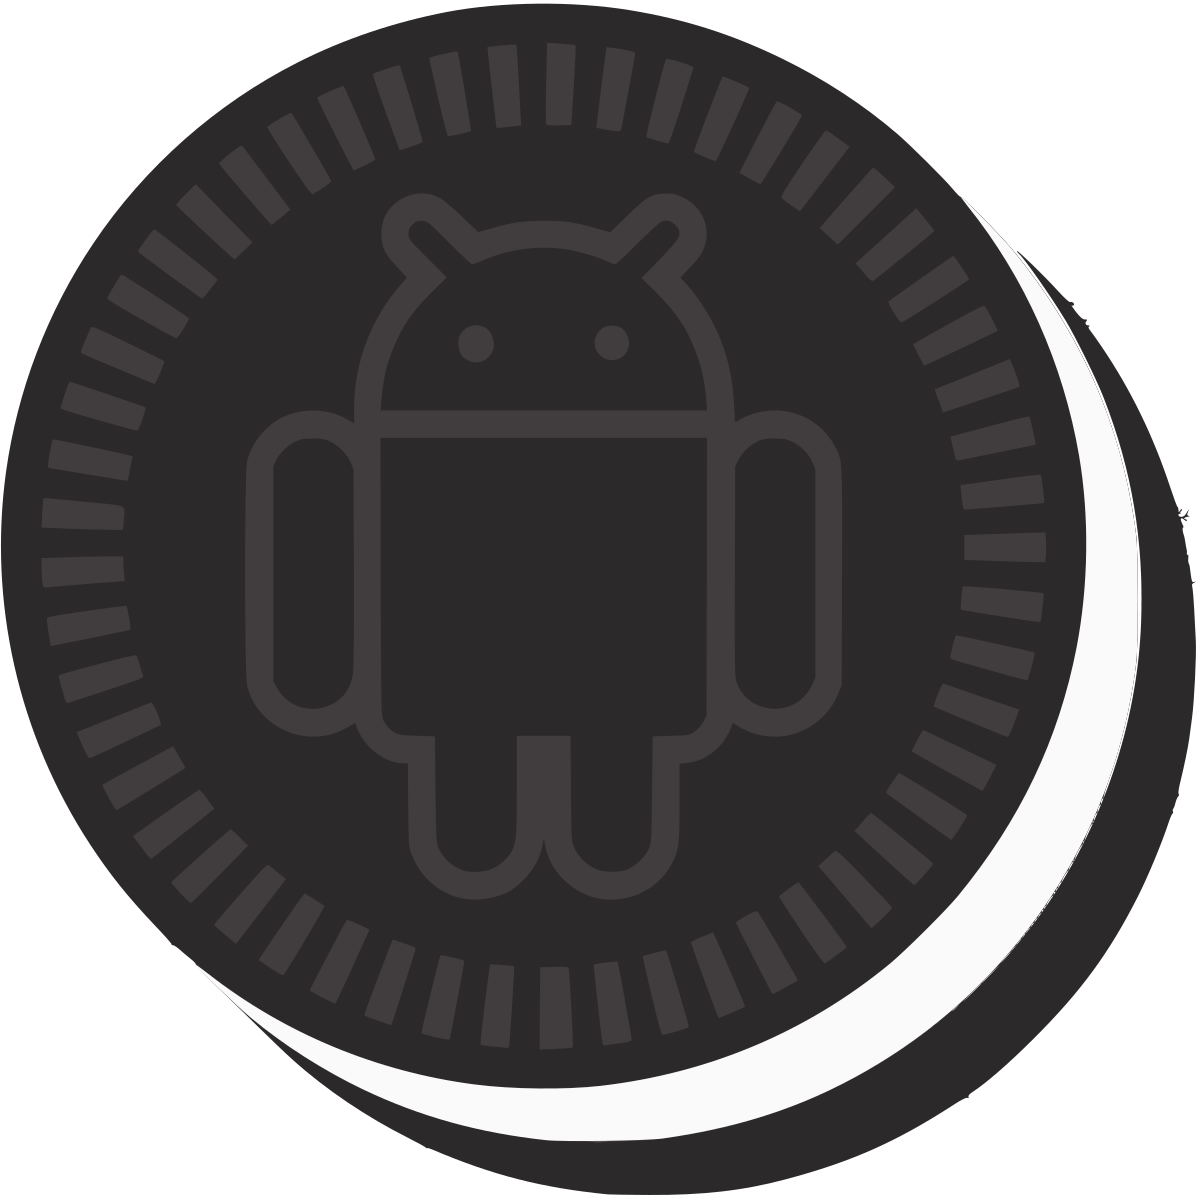 Download File:Android Oreo 8.1 logo.svg - Wikimedia Commons